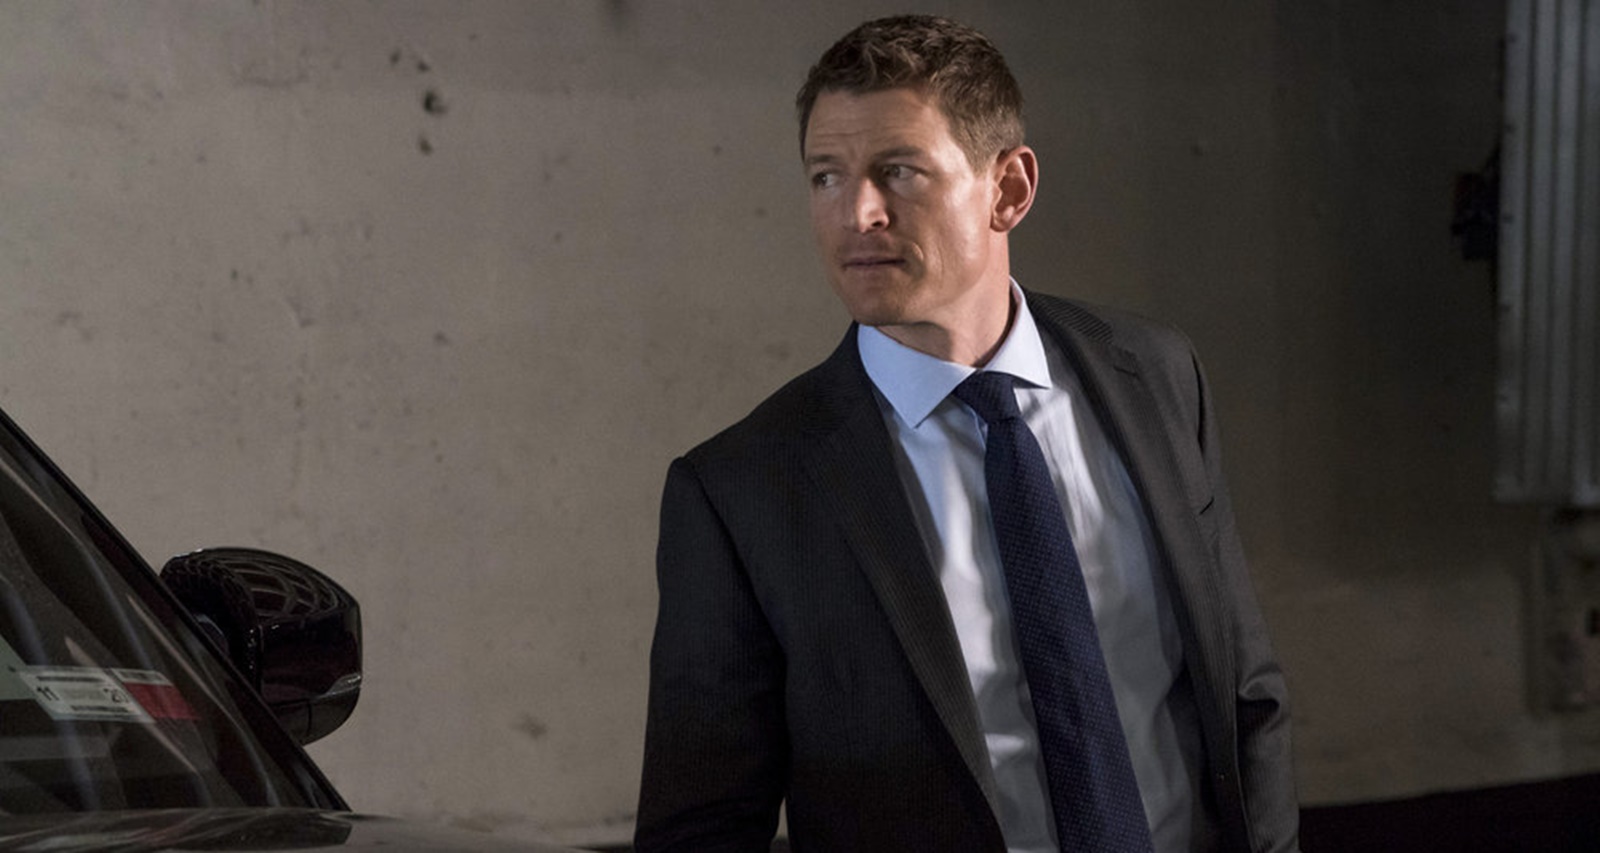 Why Did Philip Winchester Leave “Law & Order: SVU”?